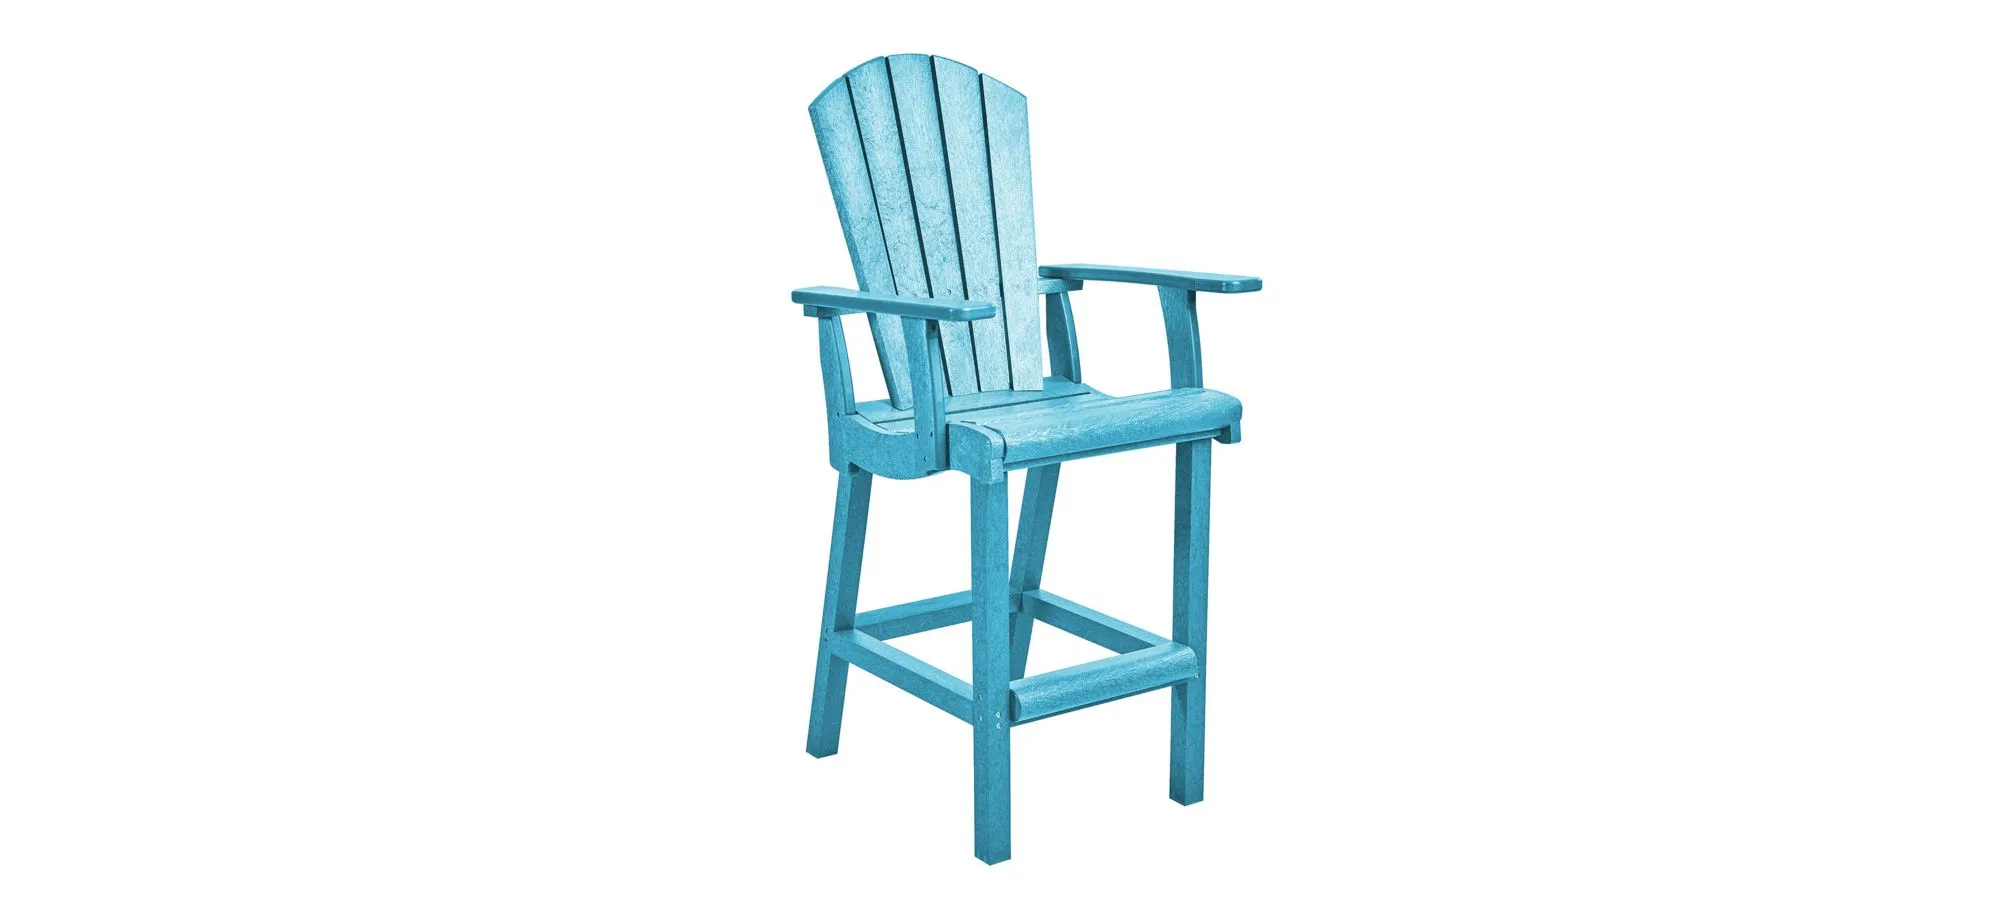 Generation Recycled Outdoor Classic Bar Height Arm Chair in Turquoise by C.R. Plastic Products